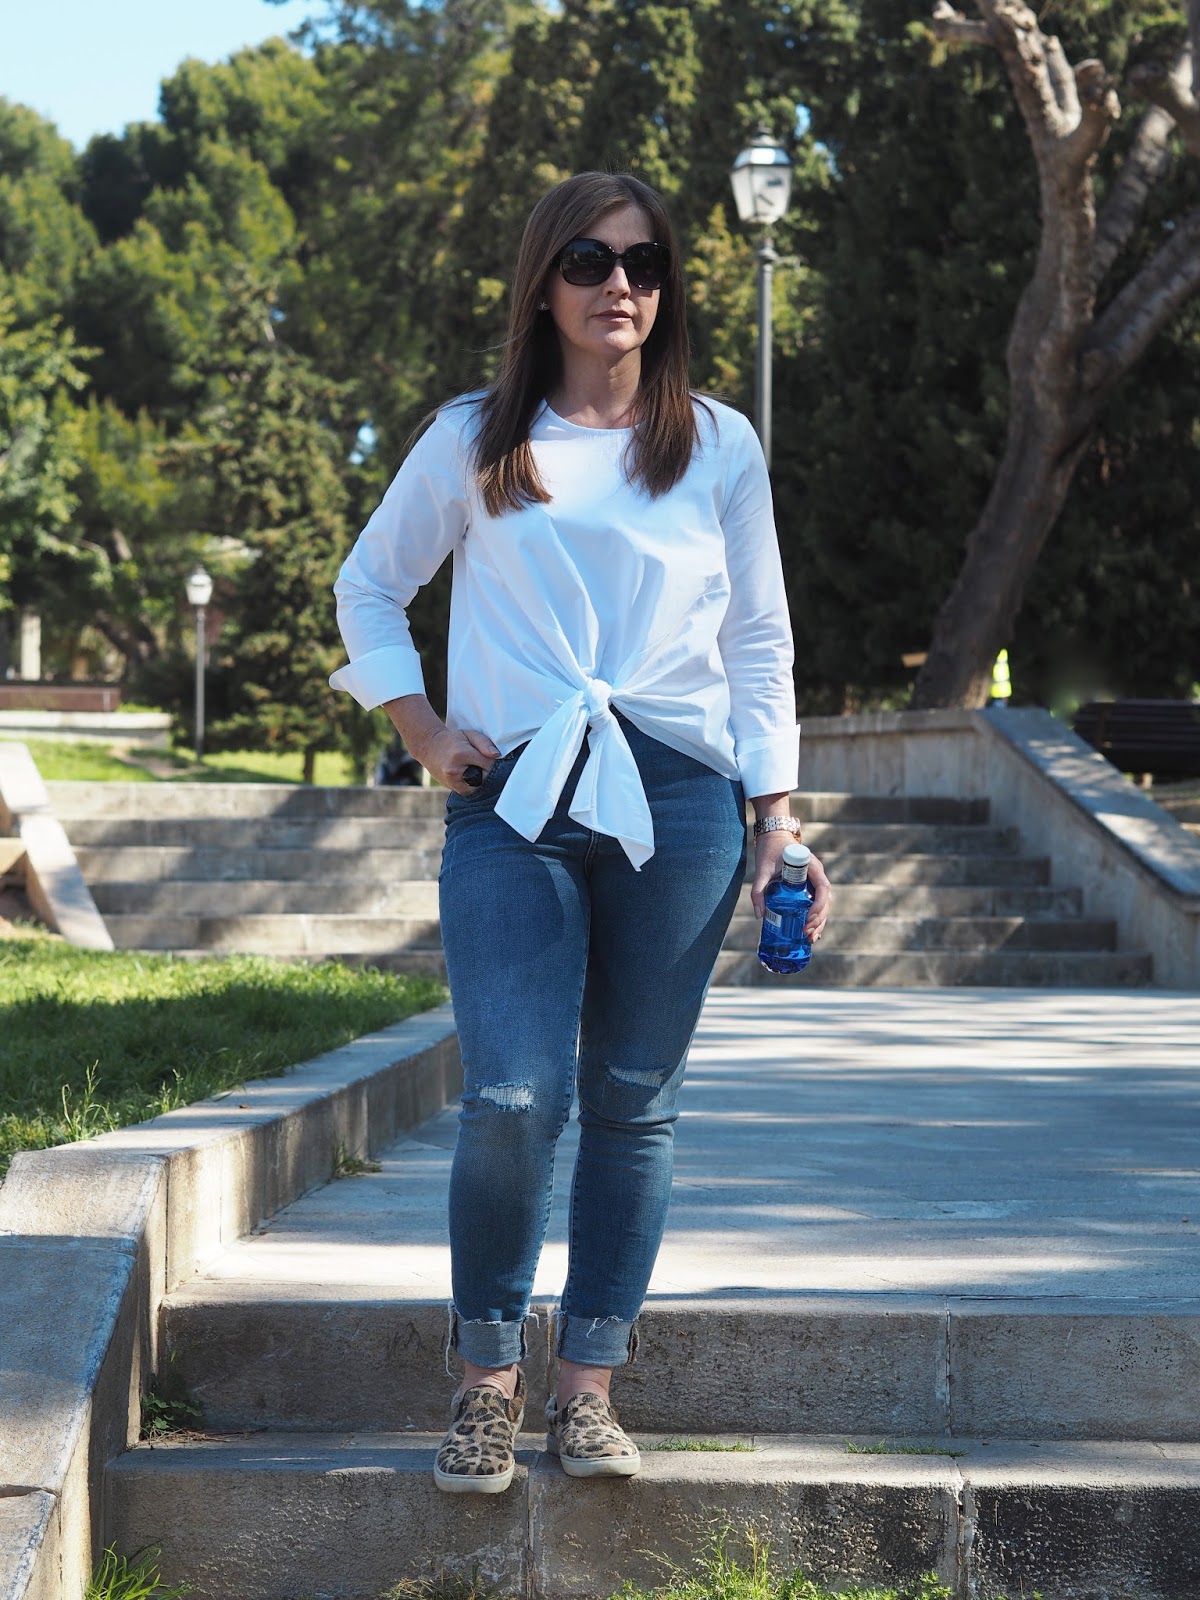 New Look petite white tie front poplin top M&S ripped skinny jeans spring style fashion trend outfit Priceless Life of Mine over 40 lifestyle blog 